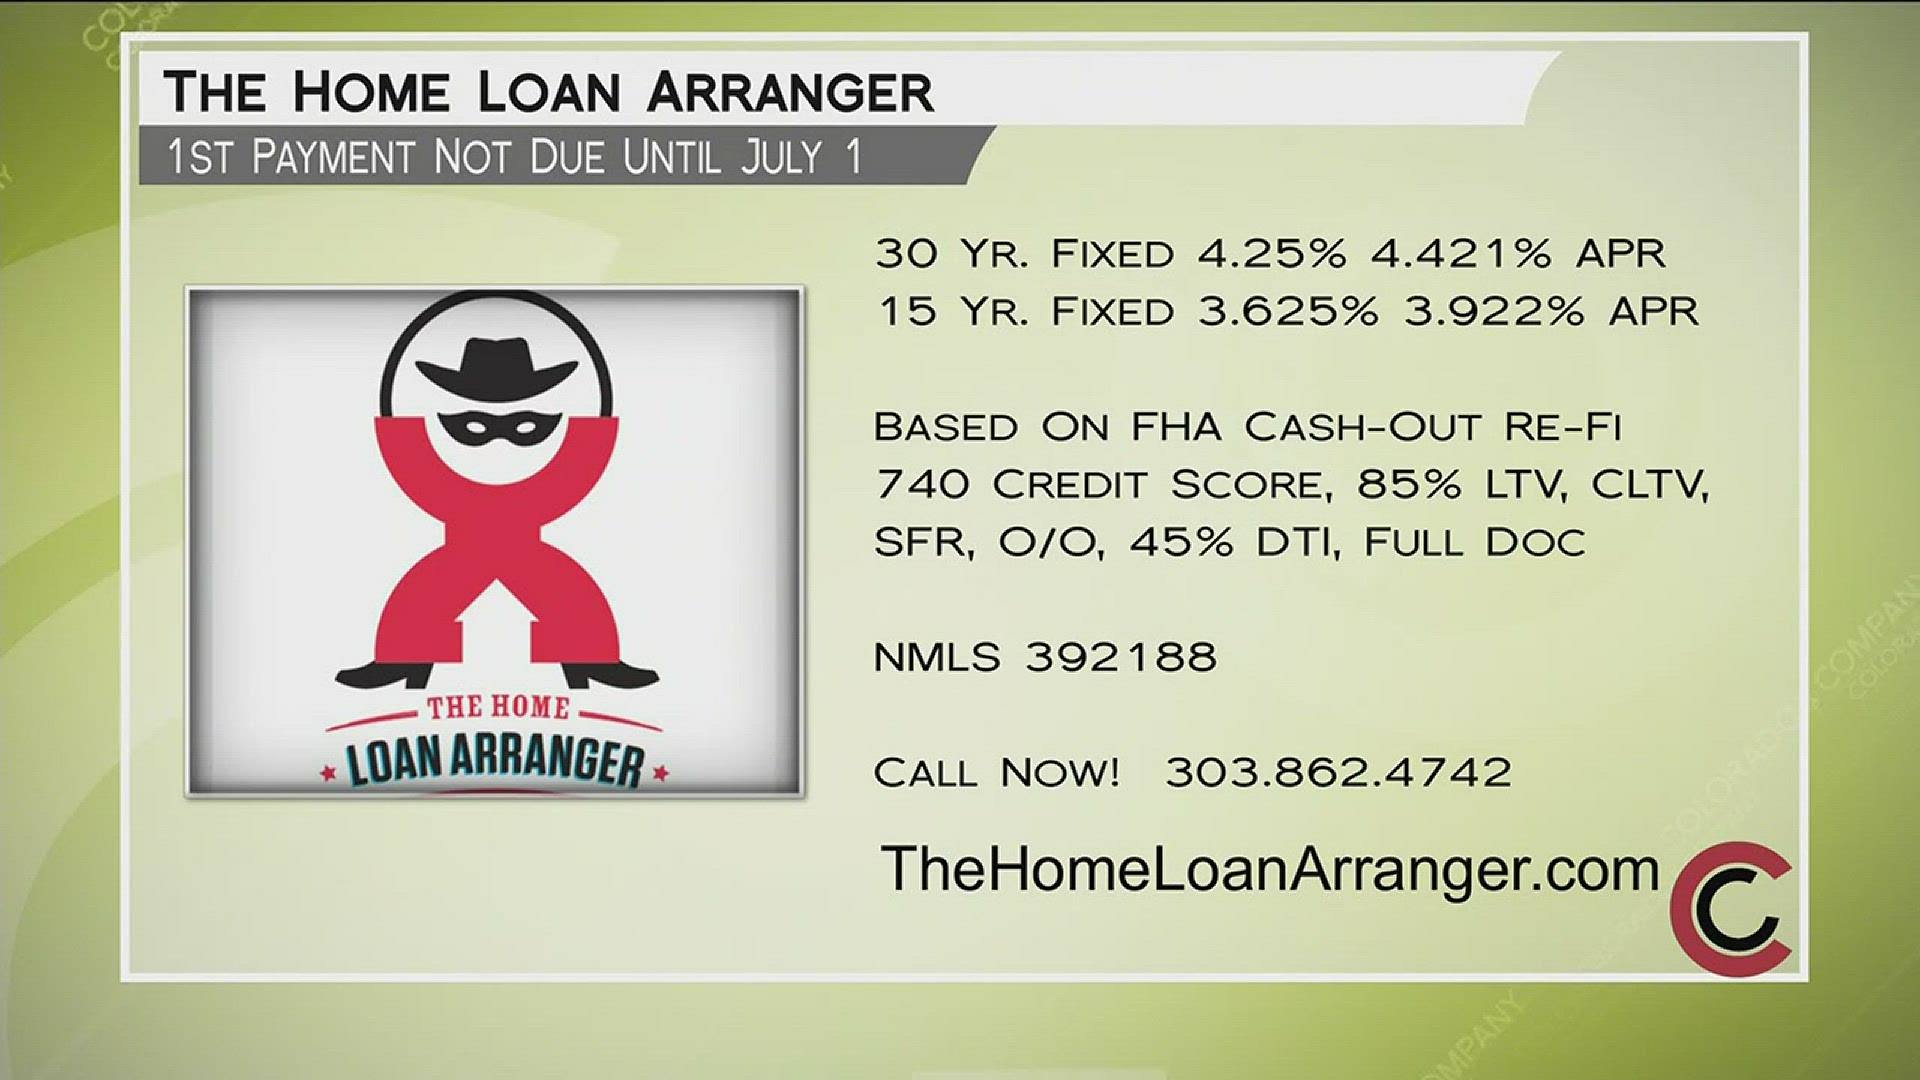 Make the call to the Home Loan Arranger and let Jason Ruedy save you money every month. He’s aggressive about rates, and can close your loan fast. Current rates are based off a variety of factors, including your credit score. Not everyone will qualify, but you might! Call 303.862.4742 or visit www.TheHomeLoanArranger.com to find out.
THIS INTERVIEW HAS COMMERCIAL CONTENT. PRODUCTS AND SERVICES FEATURED APPEAR AS PAID ADVERTISING.